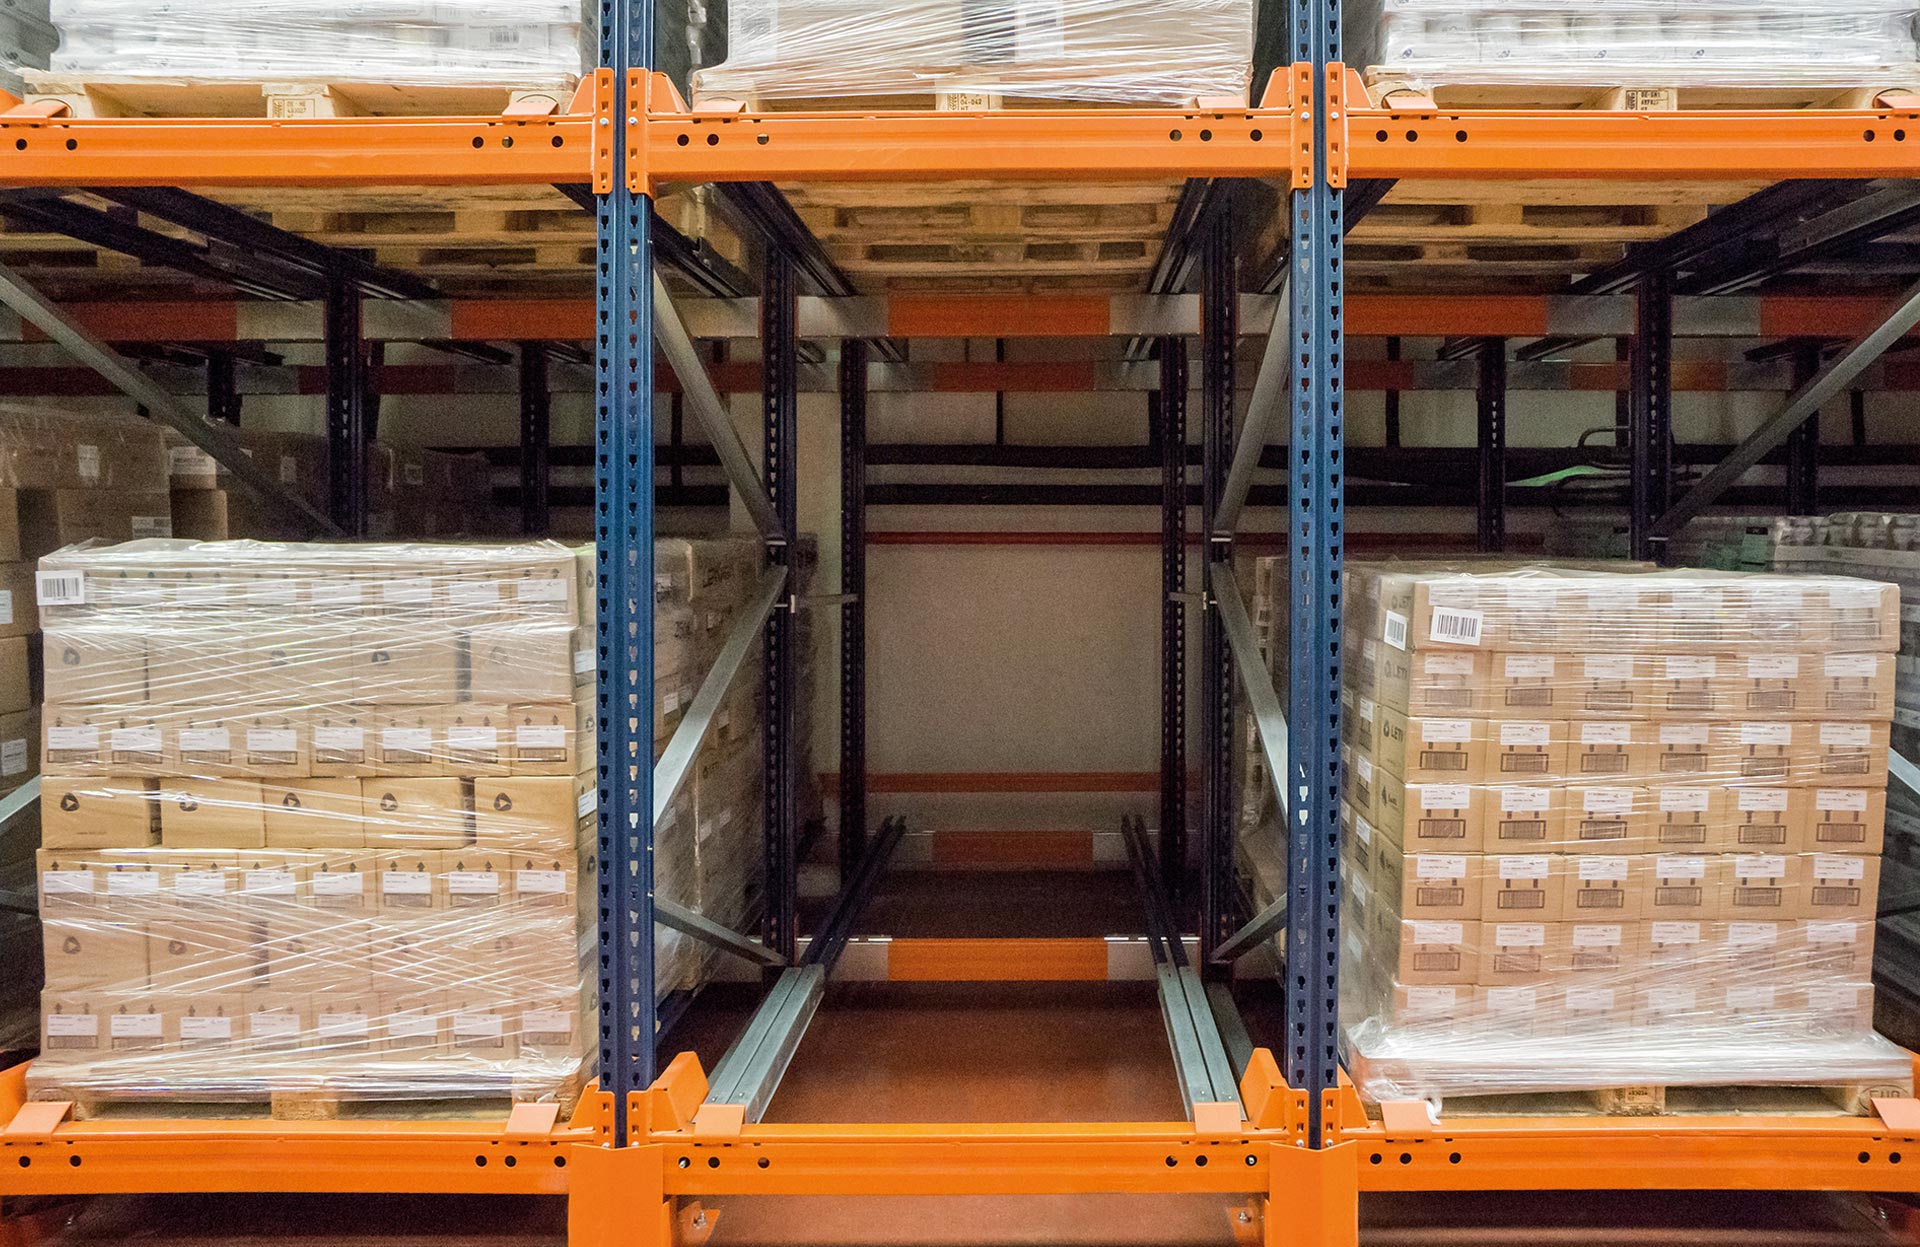 In push-back storage systems with carts, pallets are handled on the wide side